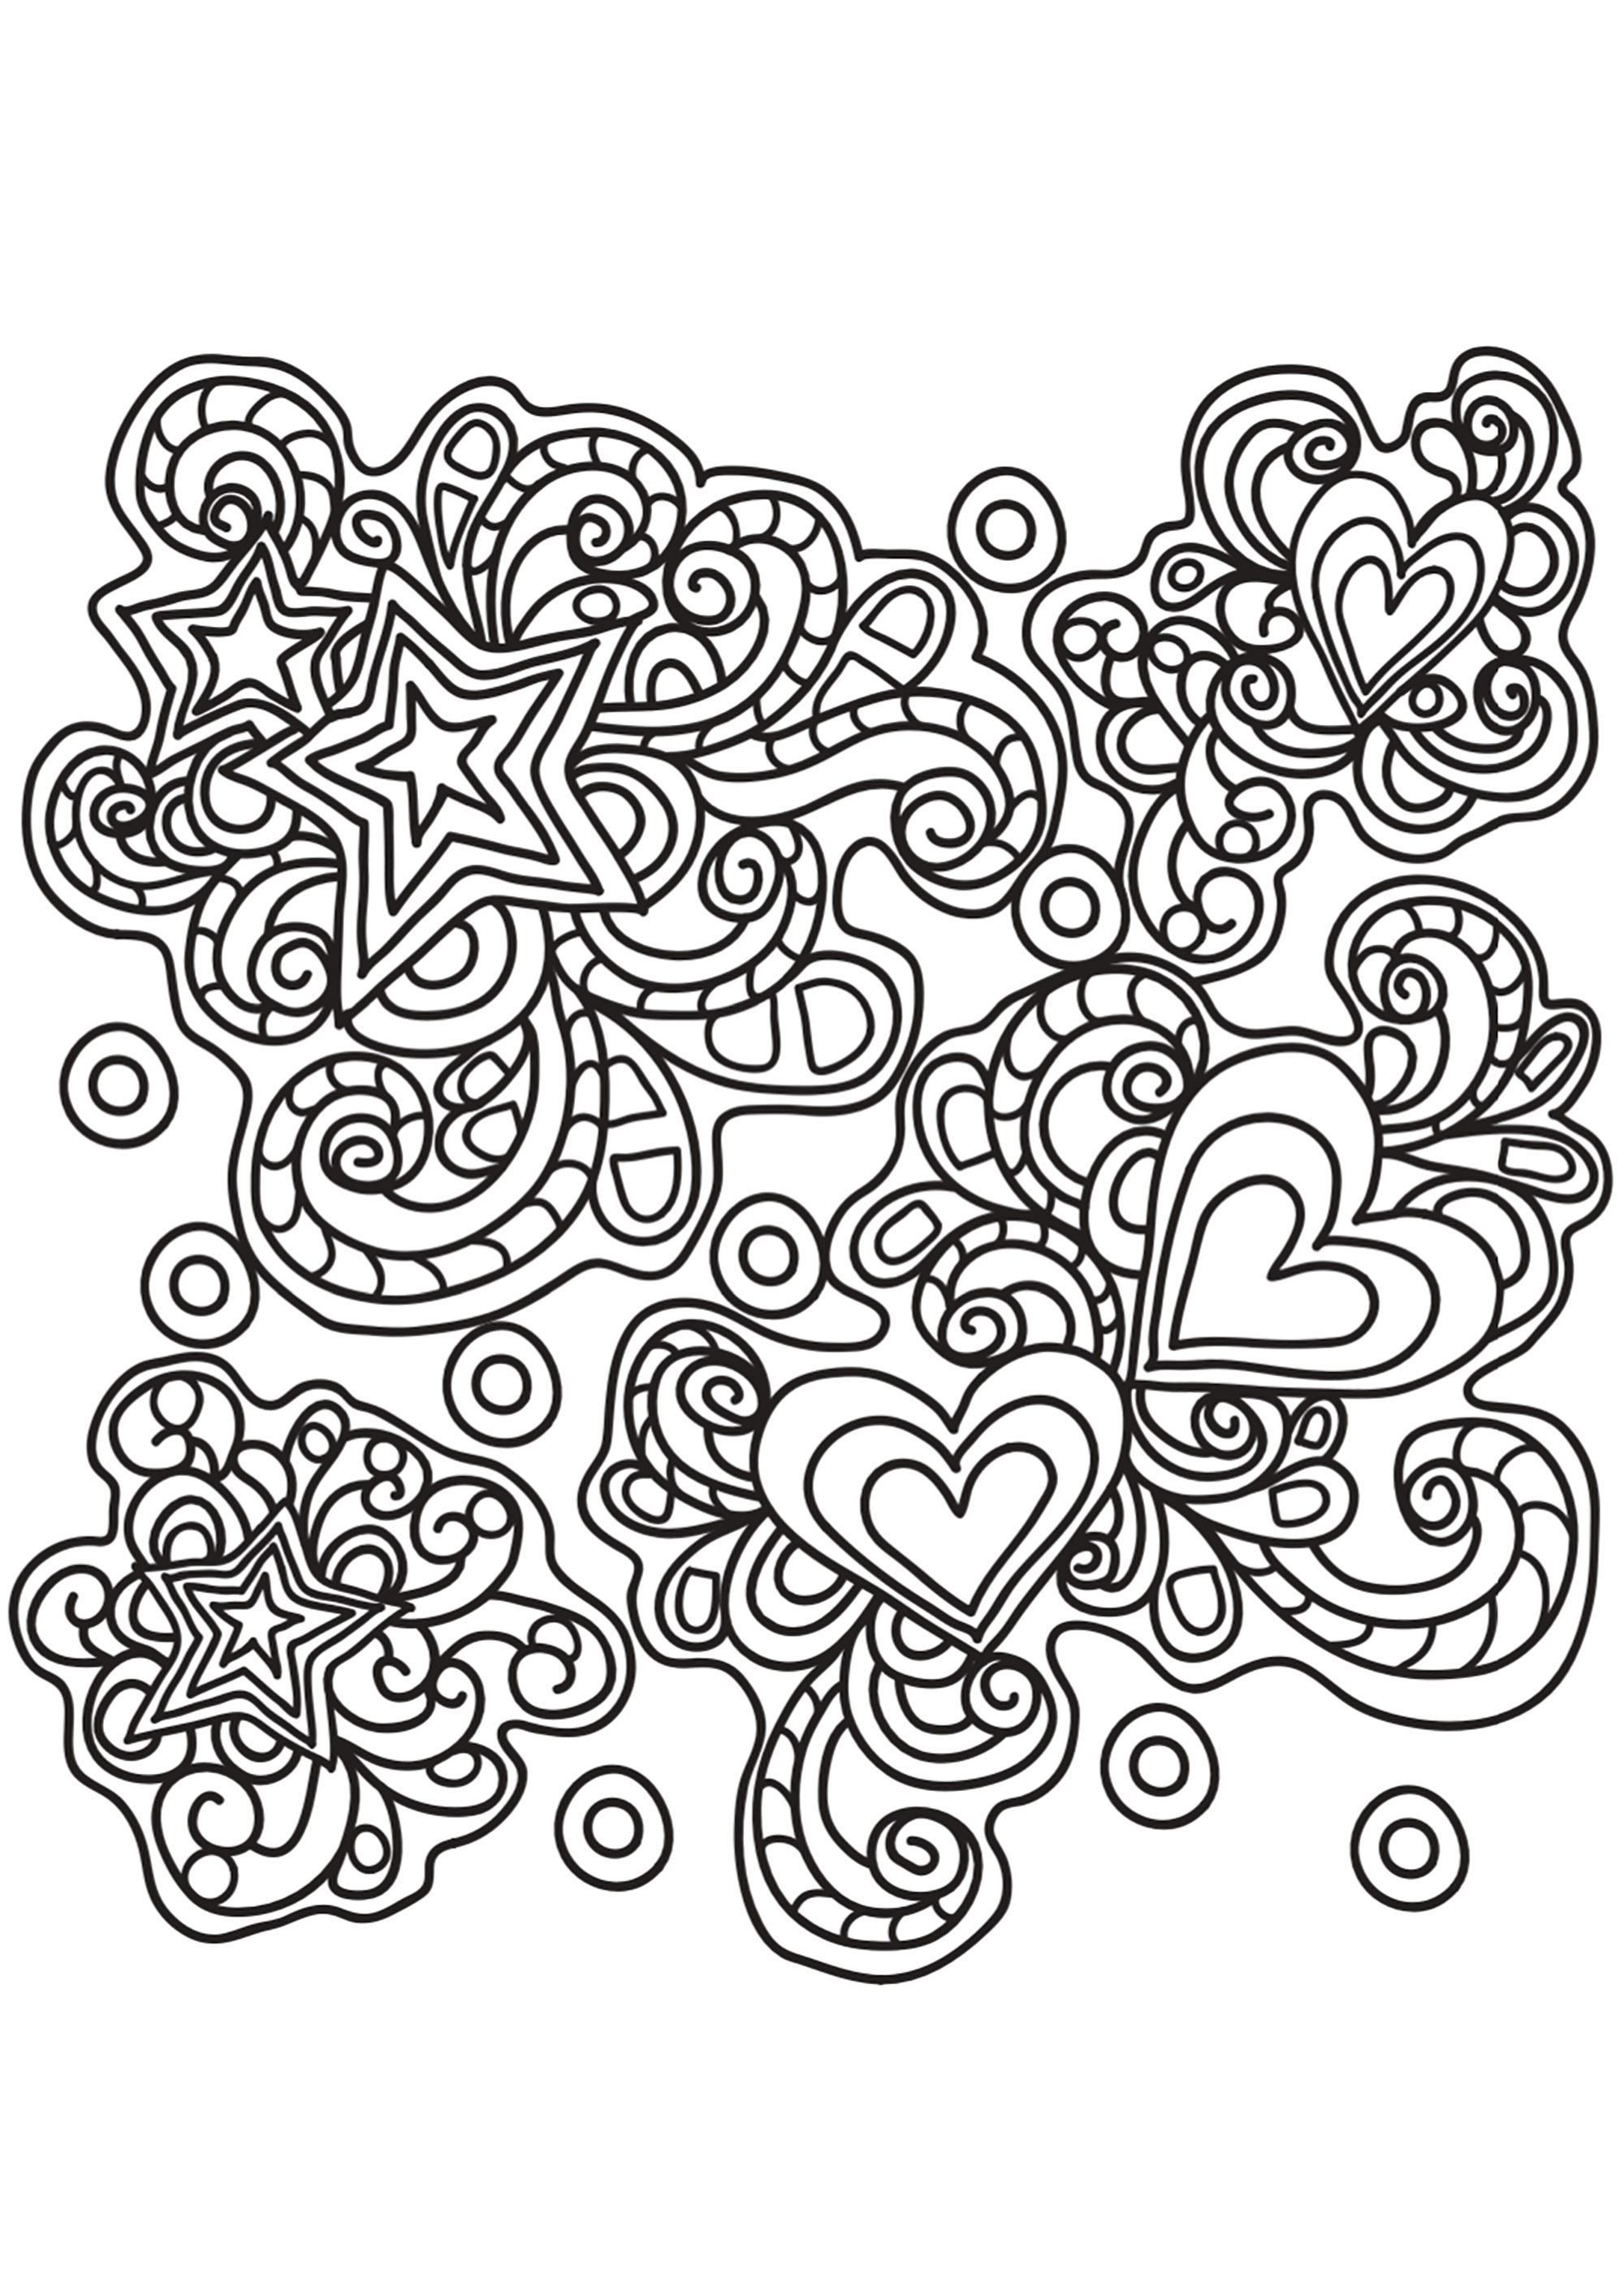 Beautiful Doodle with hearts and stars entangled together